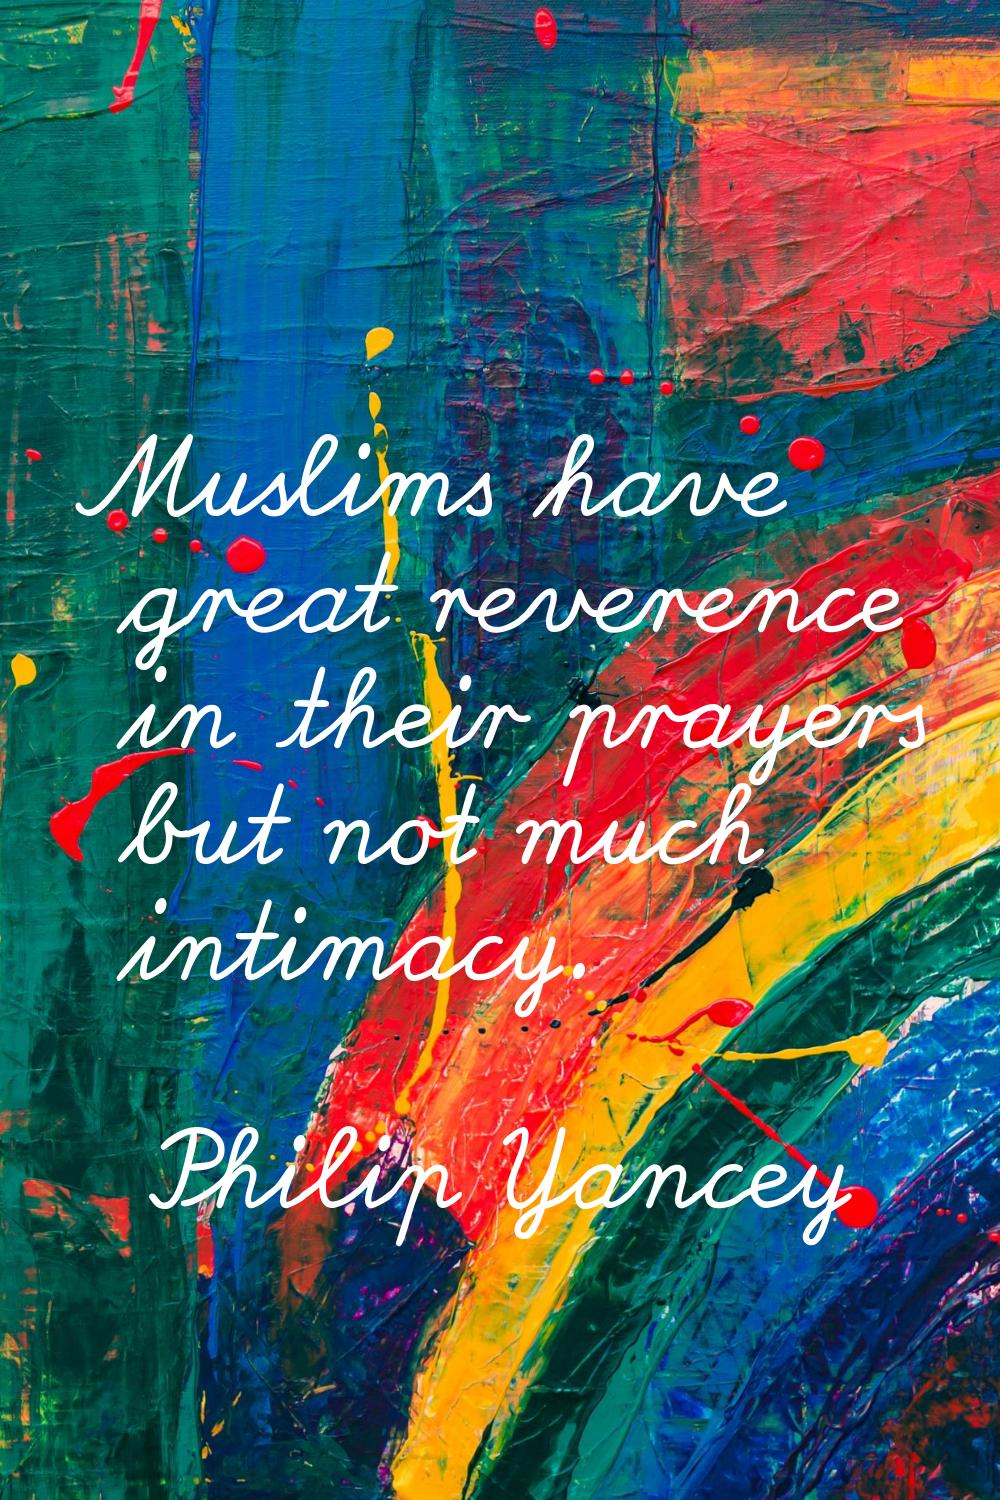 Muslims have great reverence in their prayers but not much intimacy.